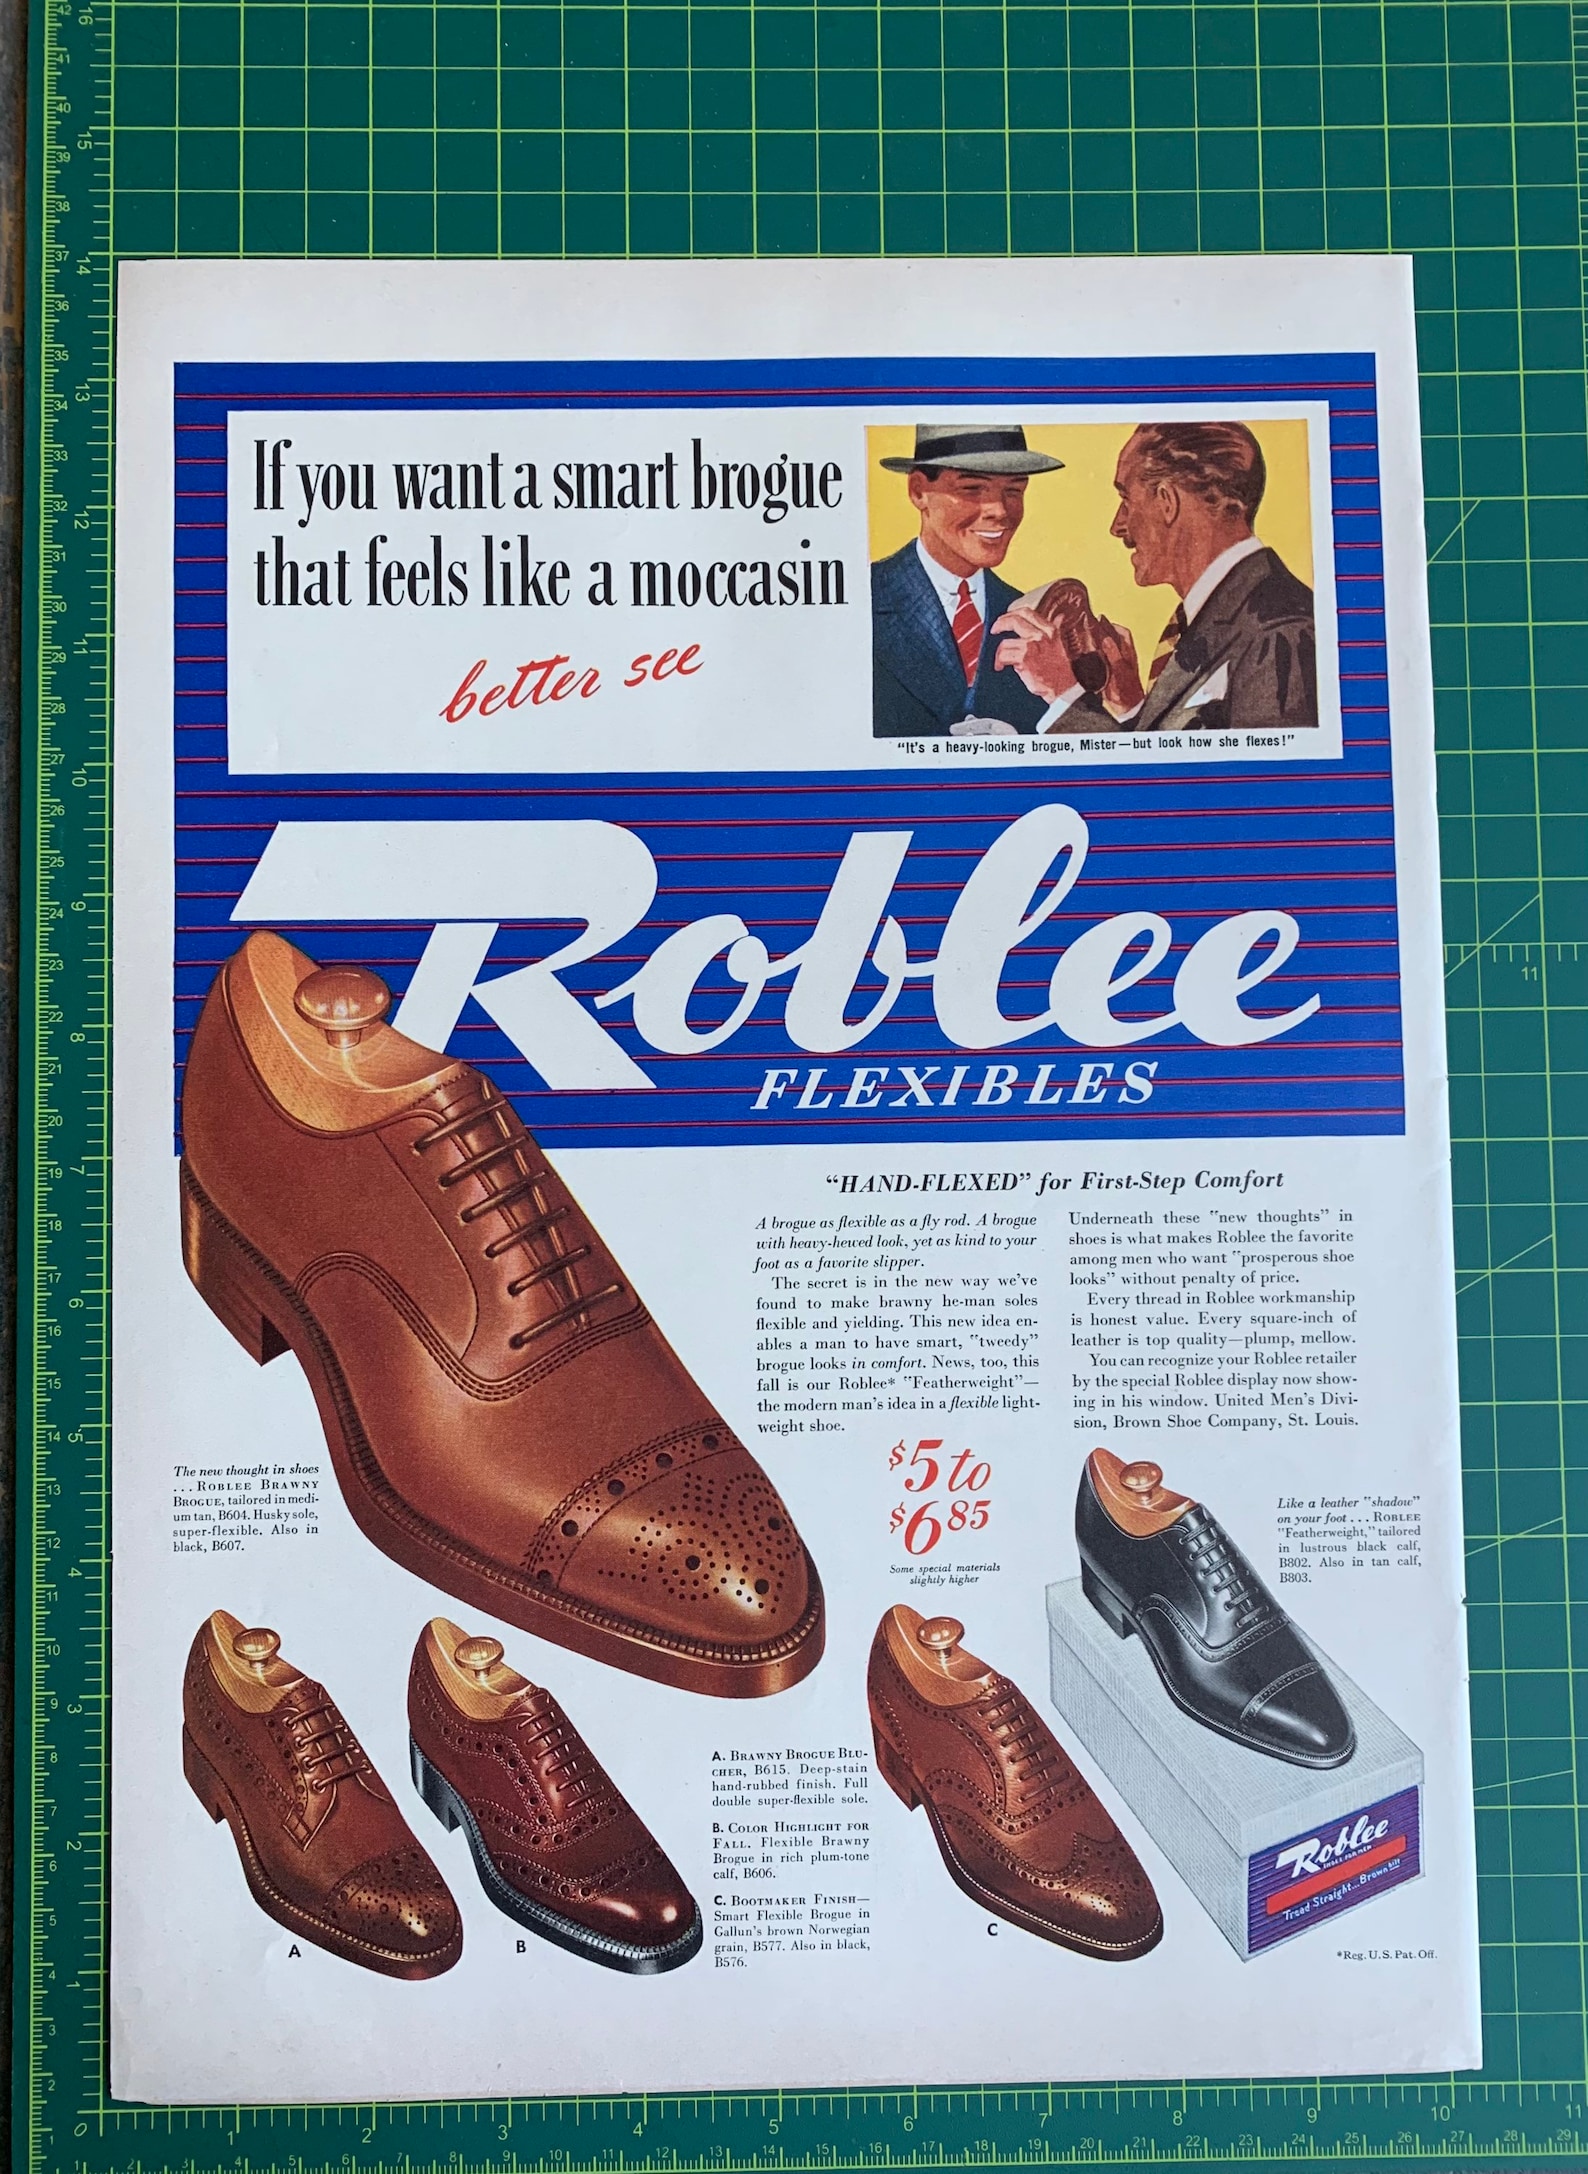 Vintage 1941 Roblee Shoes Print Ad | Etsy